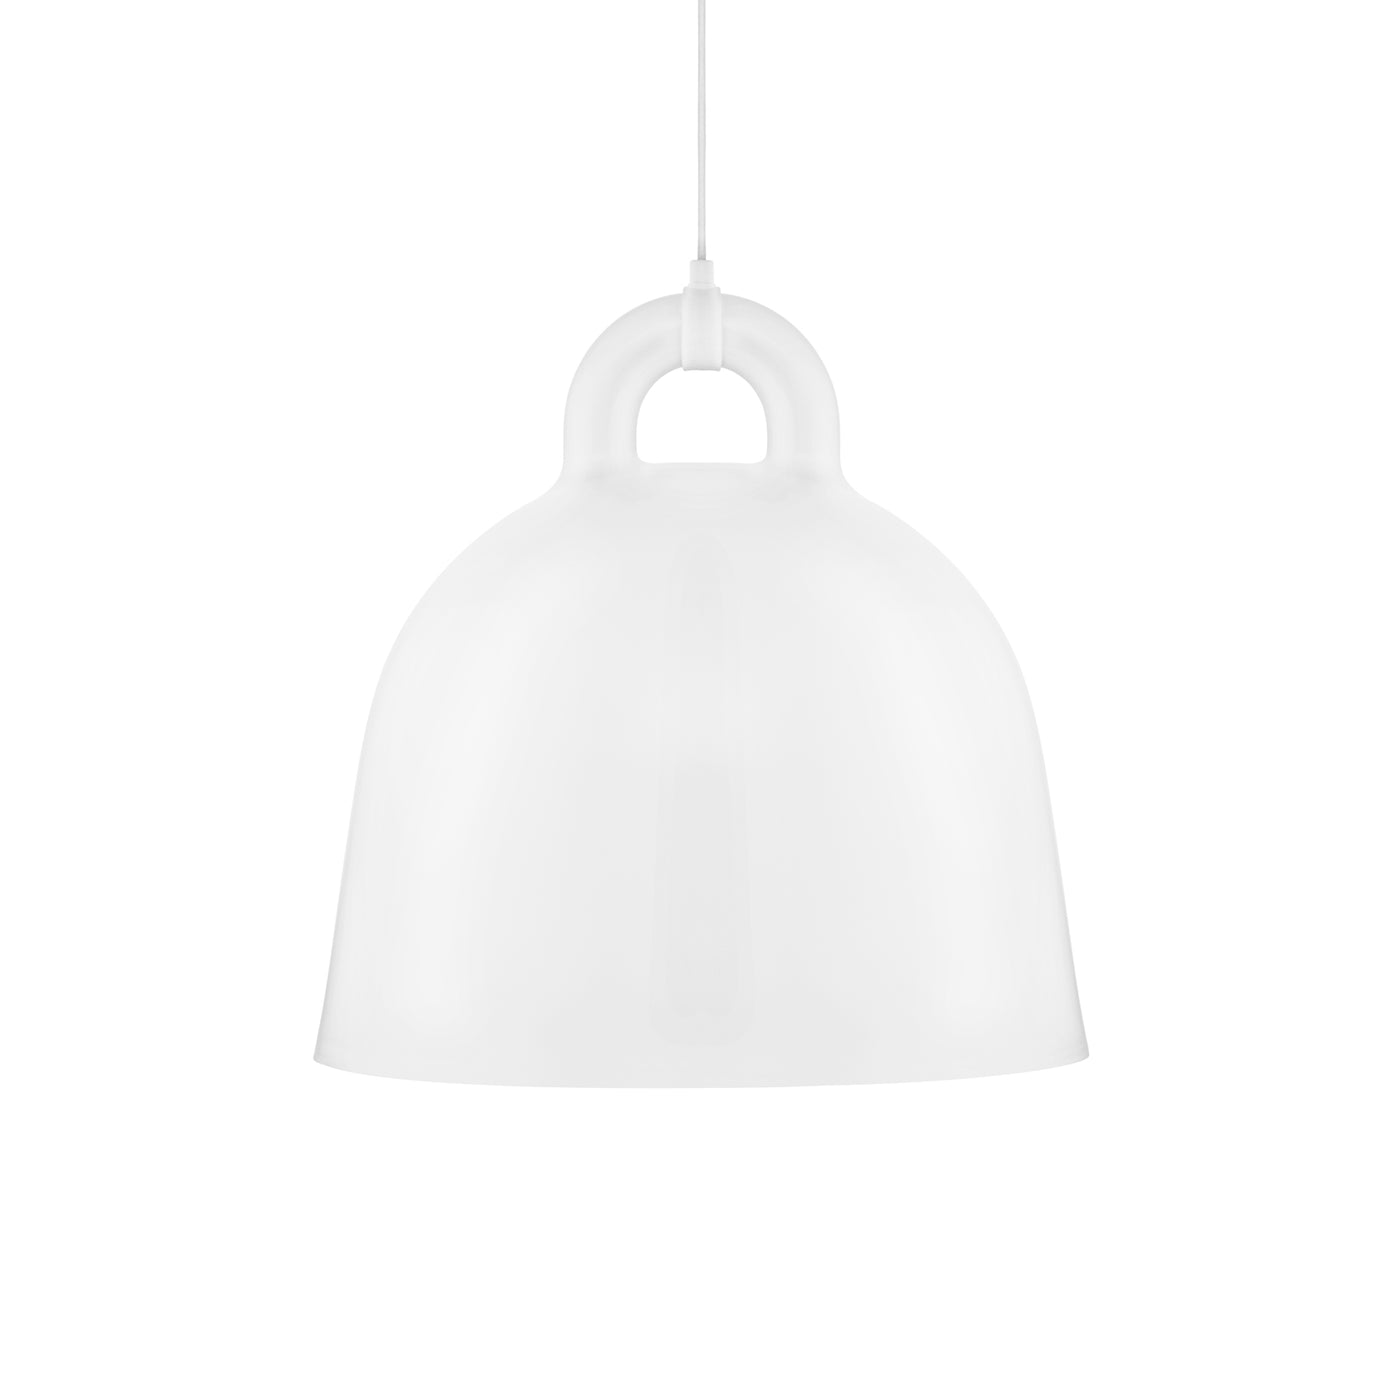 Norman Copenhagen Bell Pendant Lamp in white. Free UK delivery from someday designs #size_large